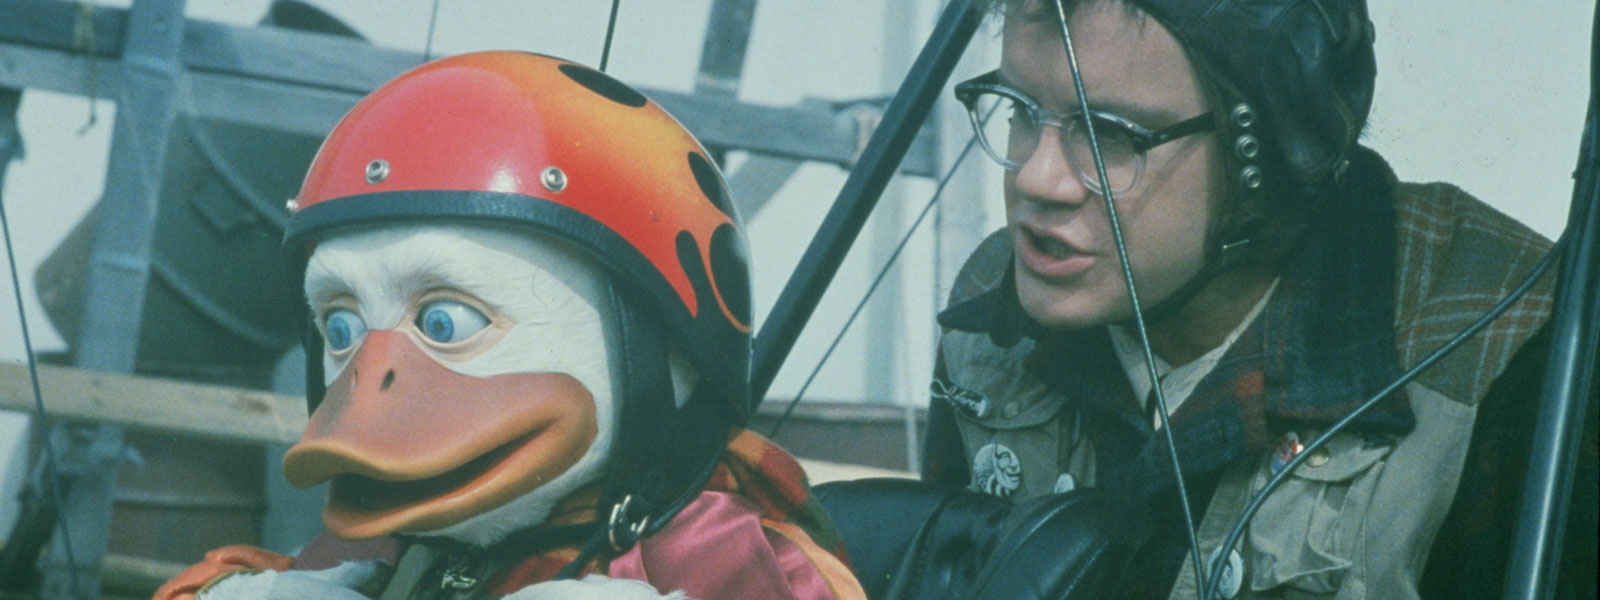 Image from 'Howard the Duck 70mm Special Screening'